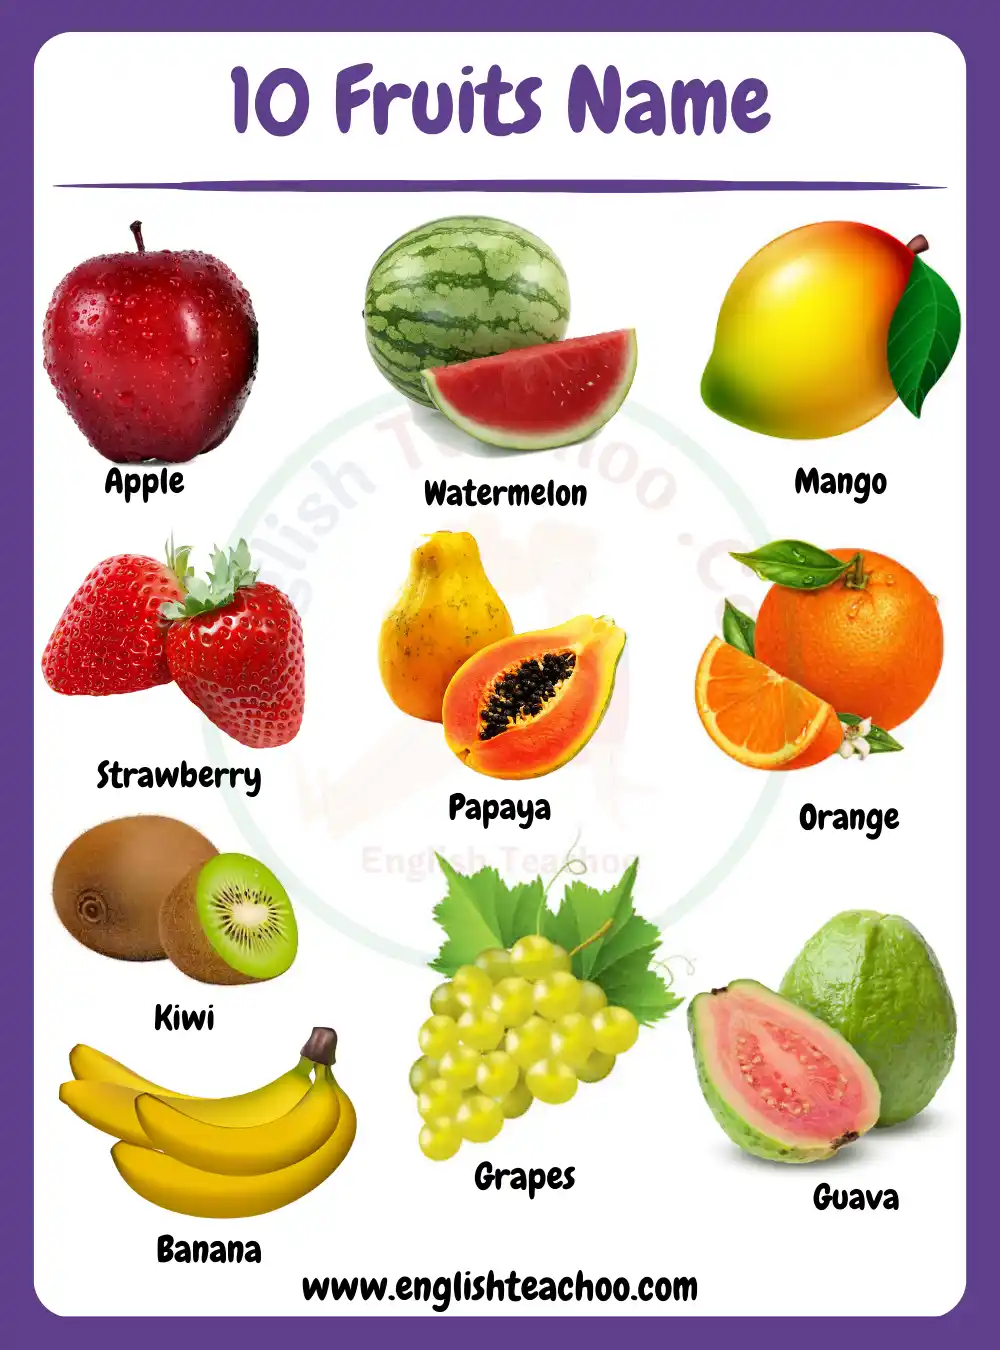 10 Fruits Name In English With Pictures